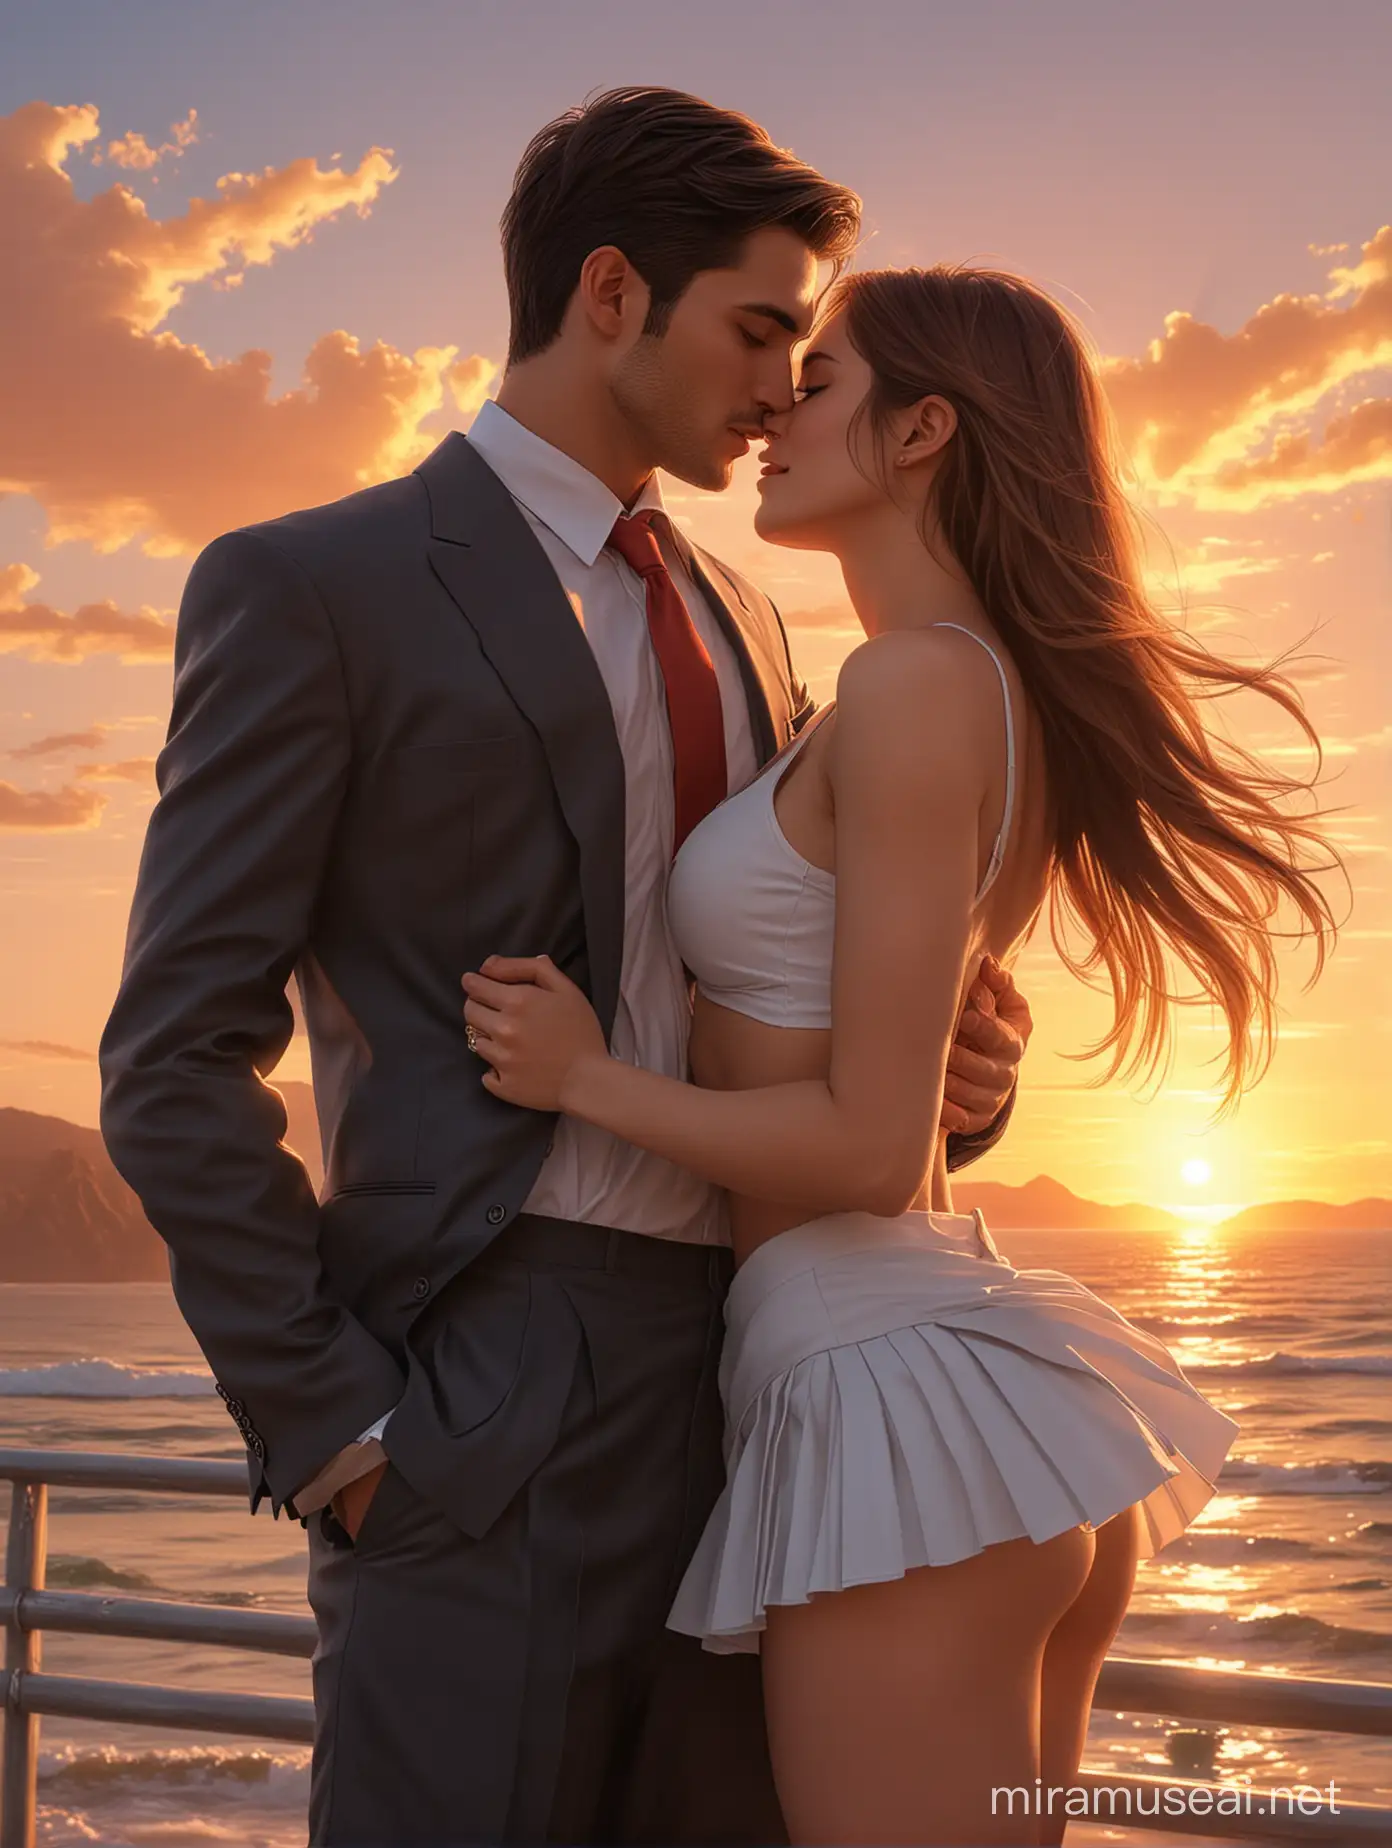 Romantic Couple Embracing at Sunset HQ Digital Art by Adrian Zingg